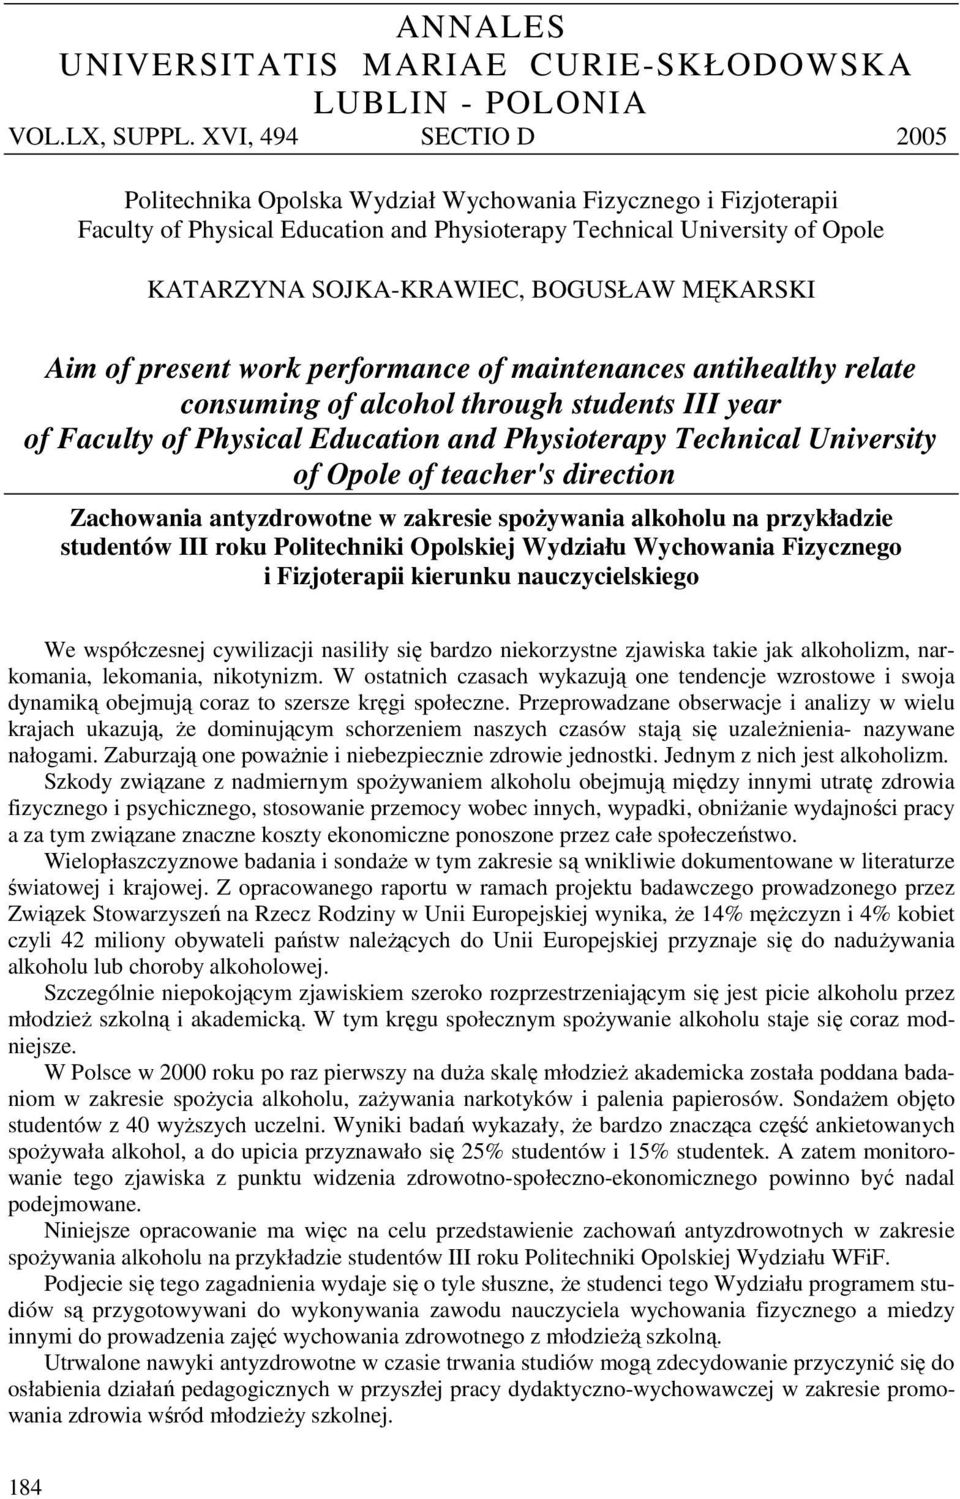 MĘKARSKI Aim of present work performance of maintenances antihealthy relate consuming of alcohol through students III year of Faculty of Physical Education and Physioterapy Technical University of